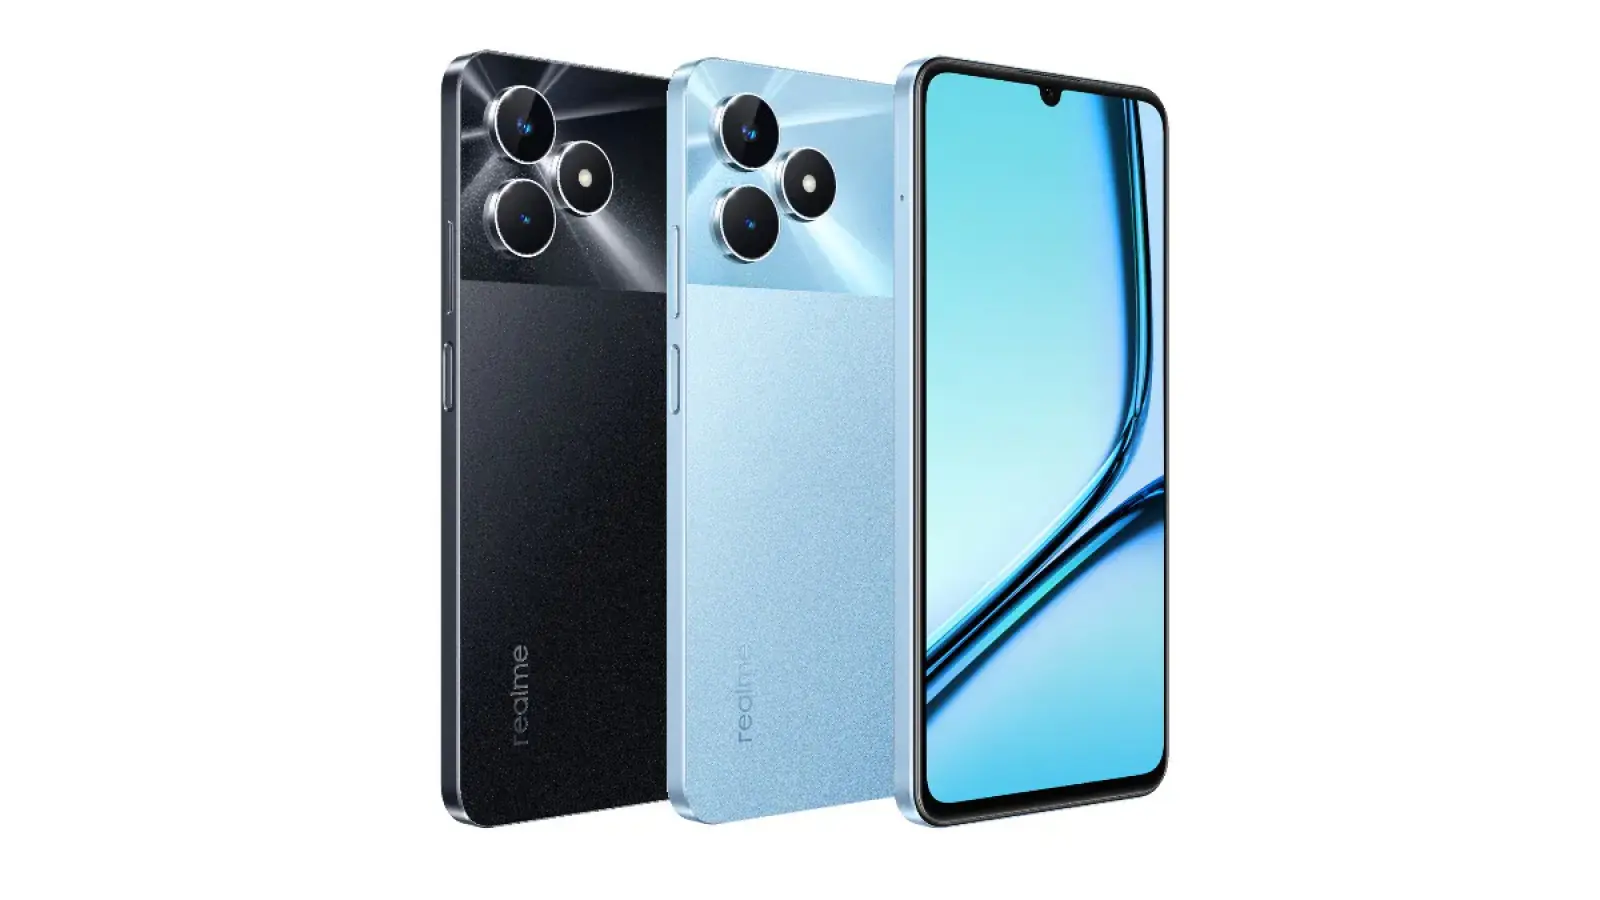 Preparations to launch Realme Note 60, smartphone listed on Geekbench and BIS certification